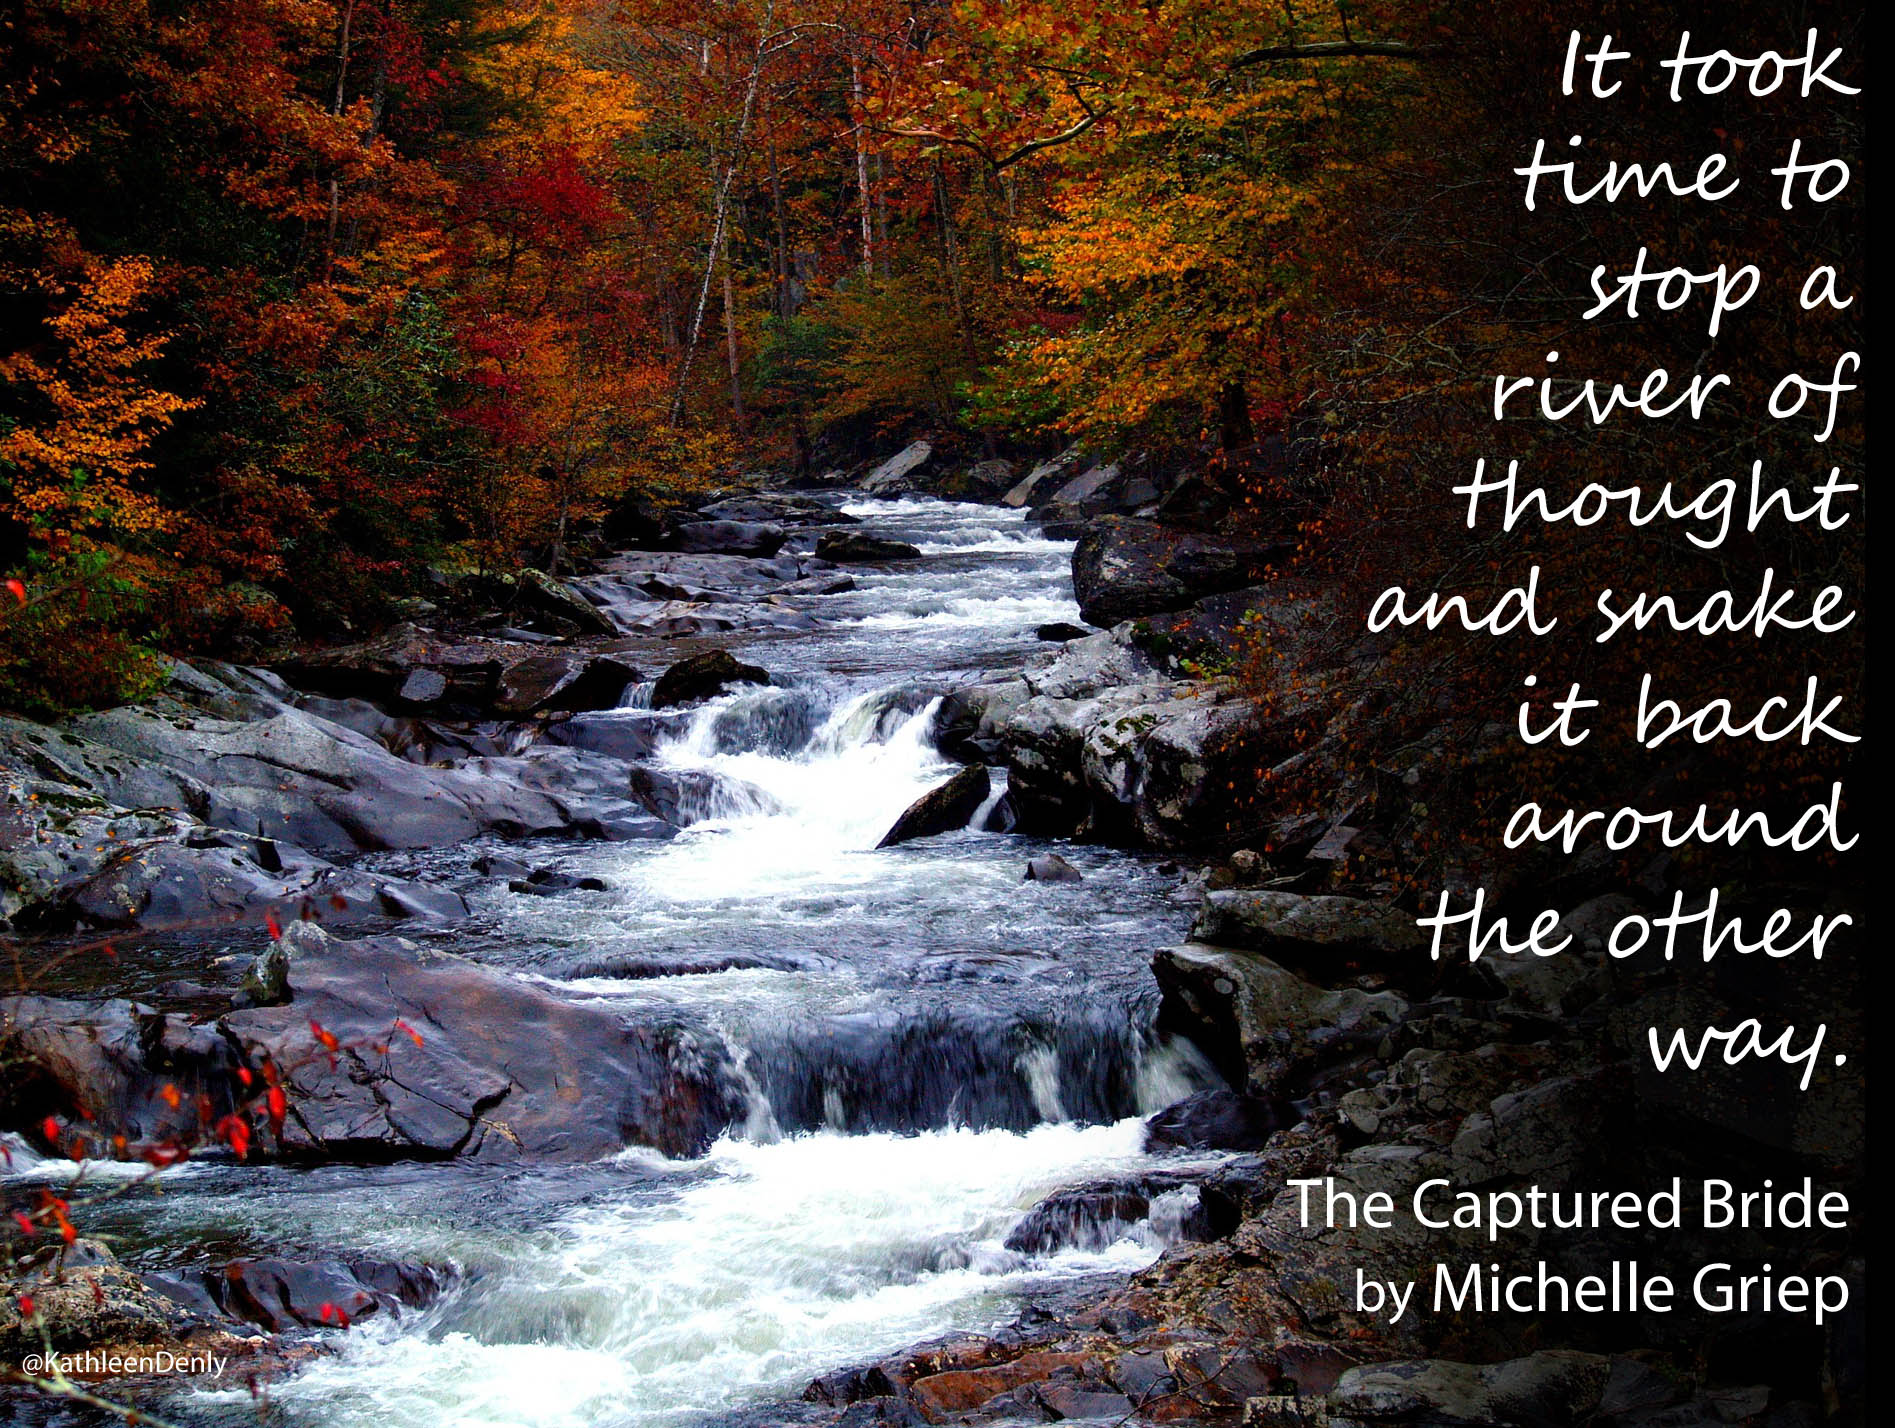 Book Quote - The Captured Bride - River of Thought